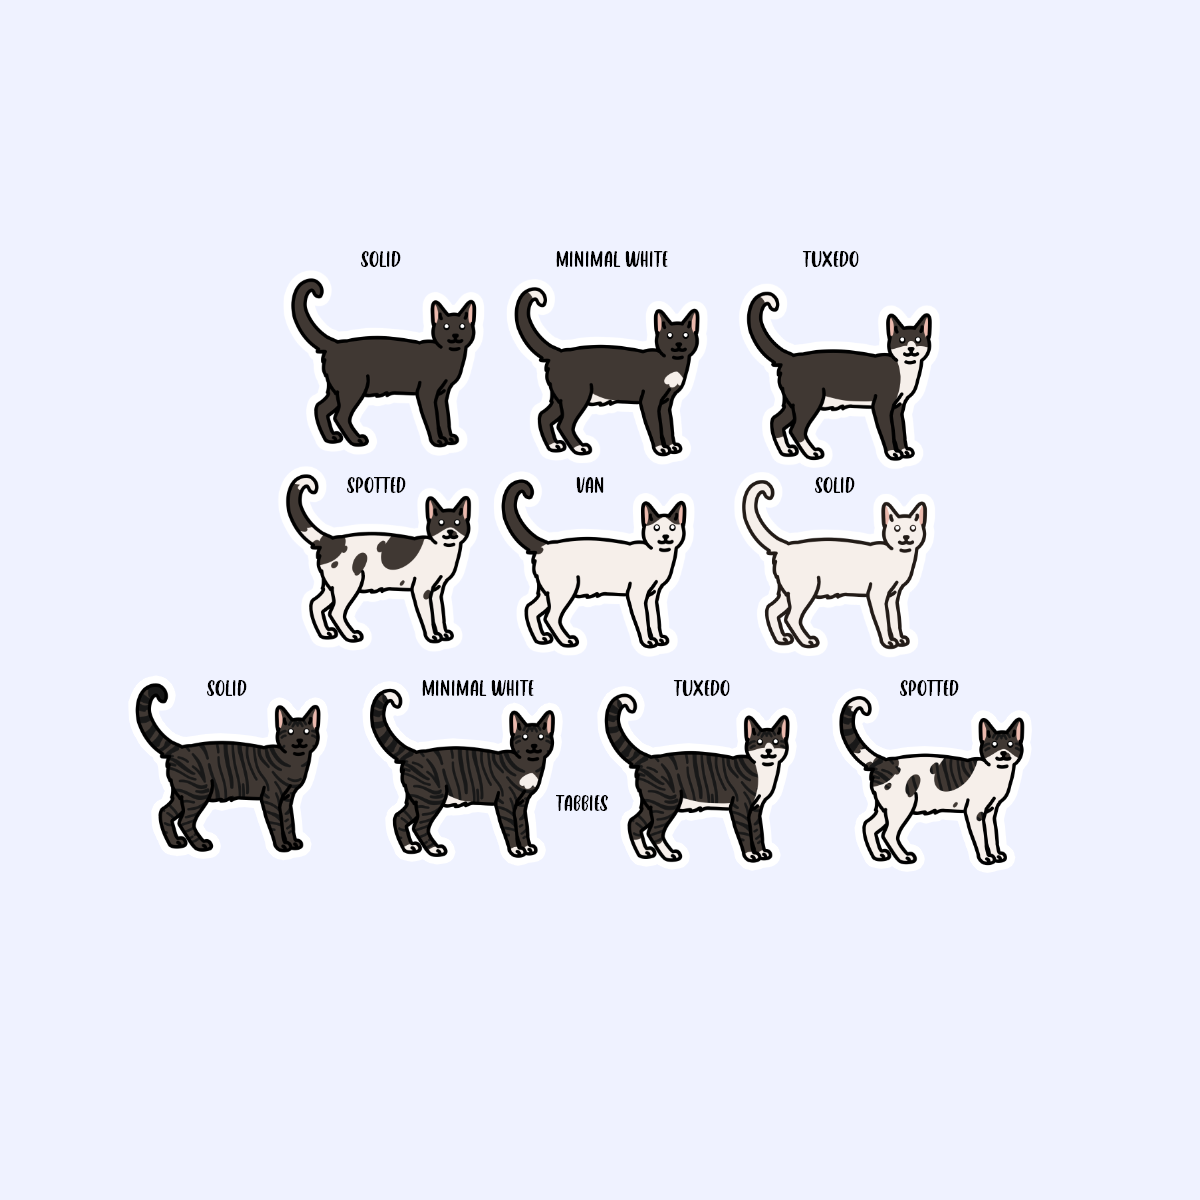 Black and White Shorthair Cats - 3" Solid and Tabby Cats